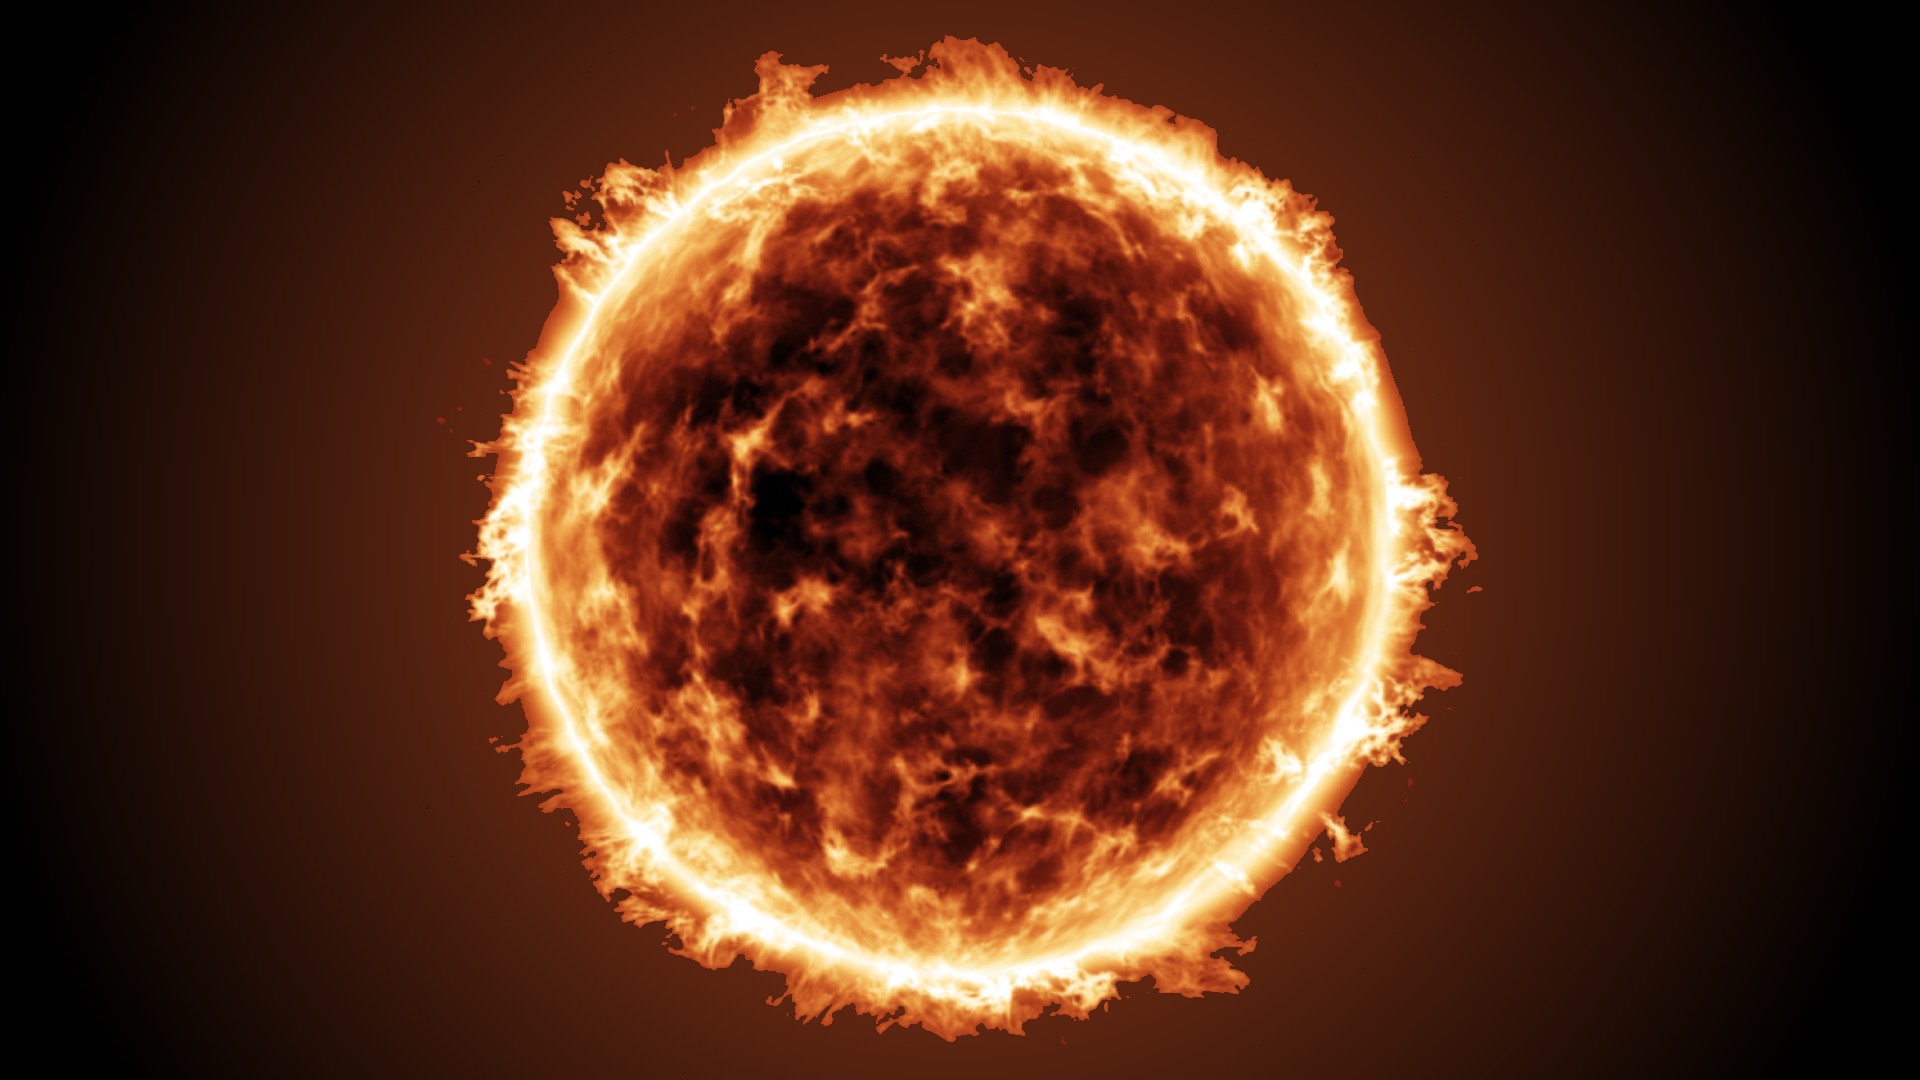 The Power of the Sun: How Nuclear Fusion Fuels Our Star